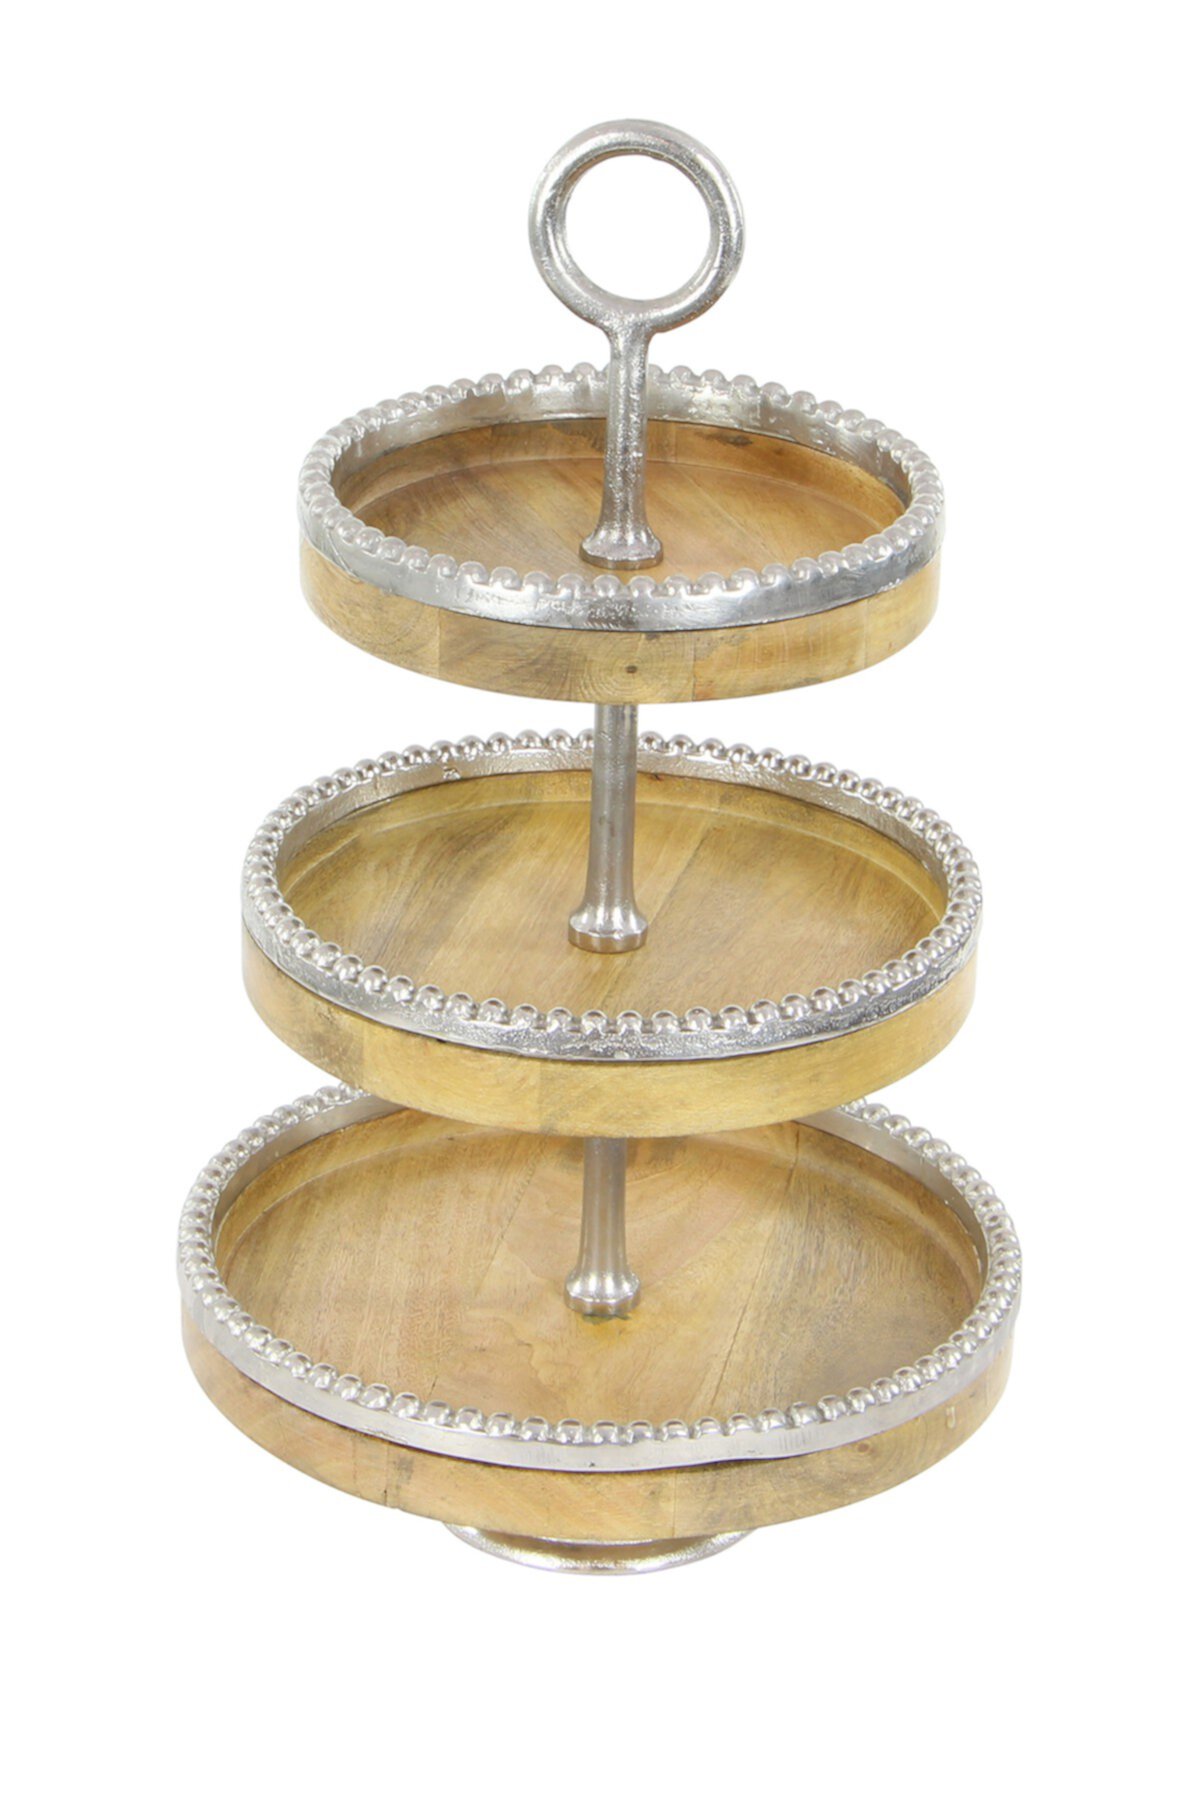 Contemporary 3-Tiered Mango Wood & Aluminum Stand Willow Row